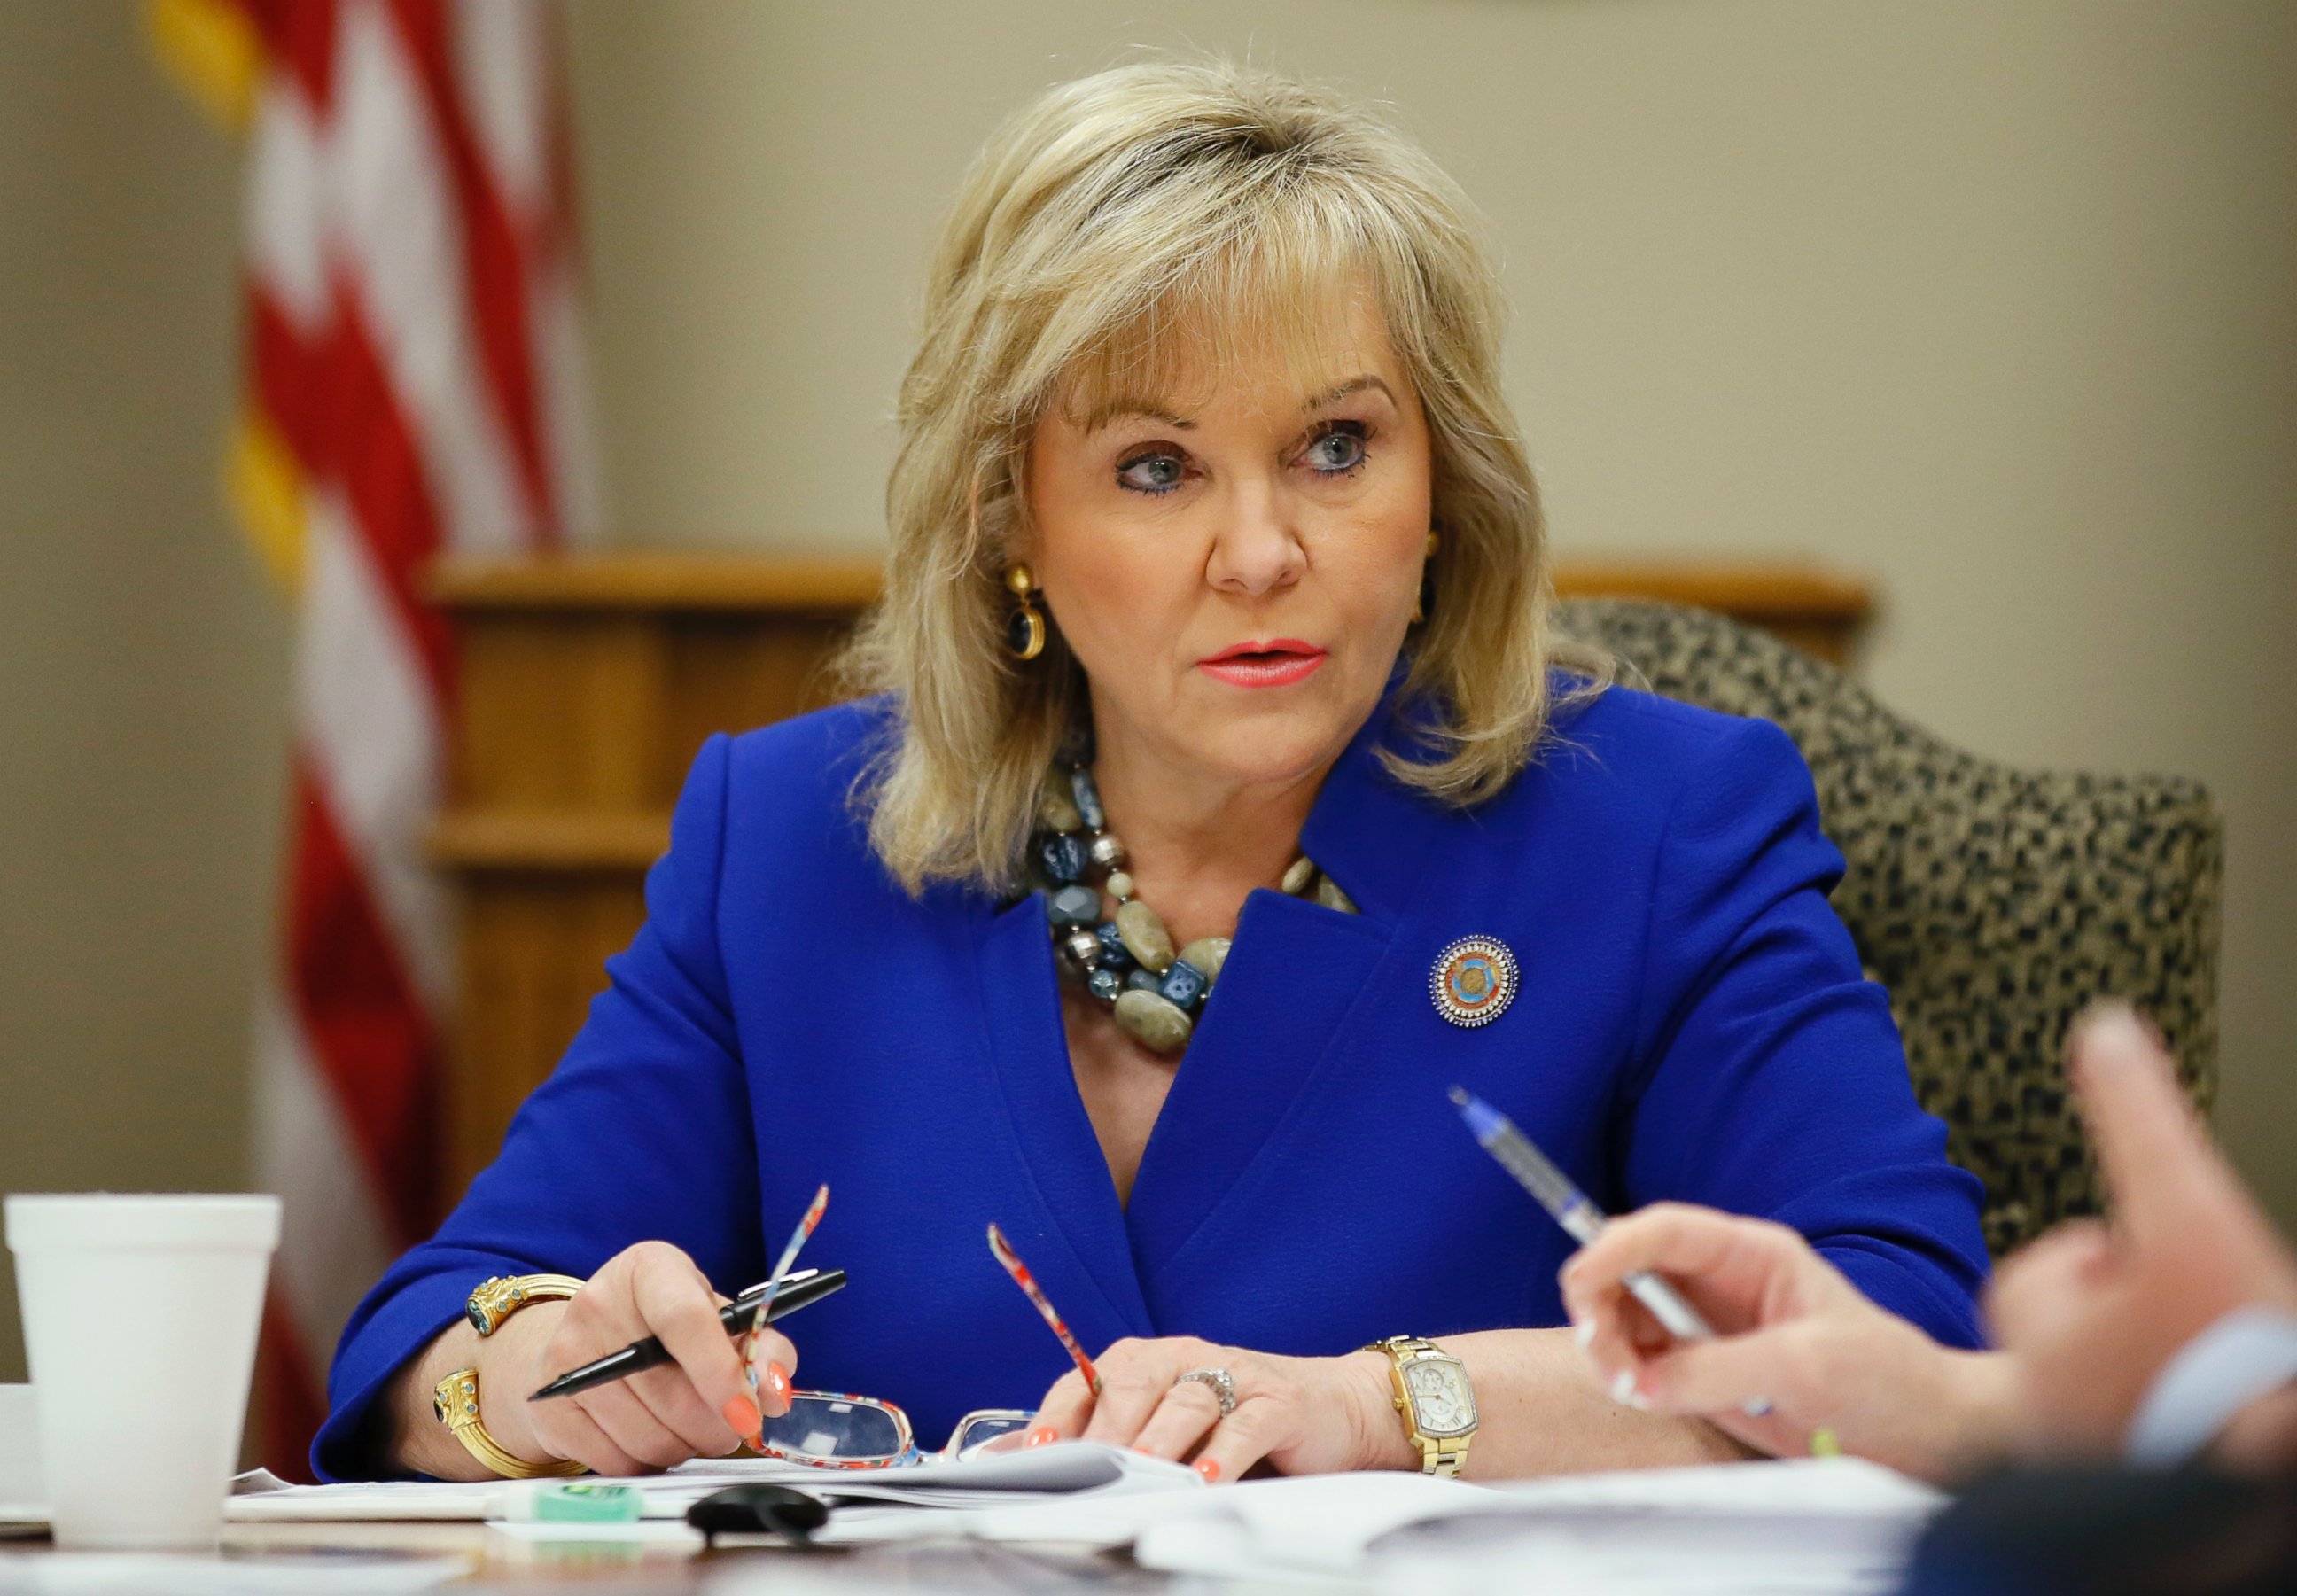 PHOTO: Oklahoma Gov. Mary Fallin attends a meeting of the State Board of Equalization in Oklahoma City, June 20, 2016.